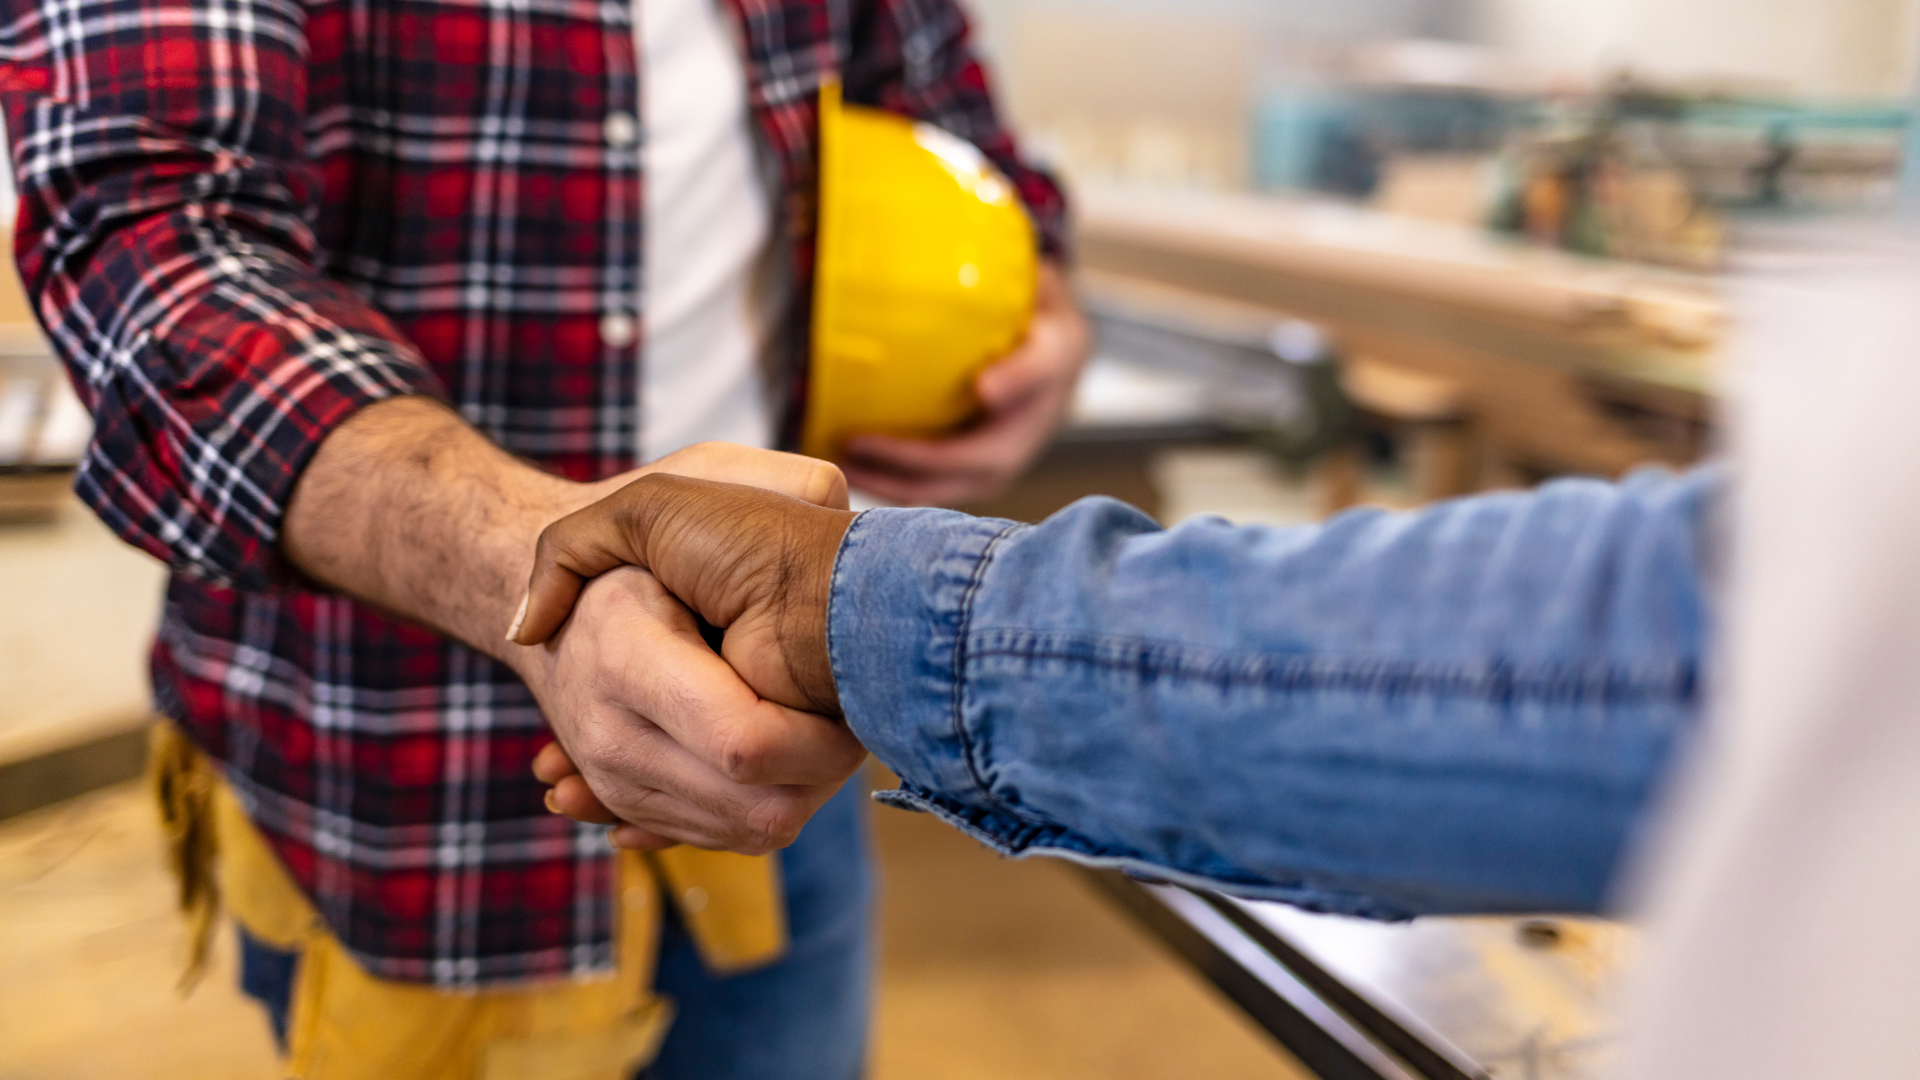 Two people shaking hands at a work site